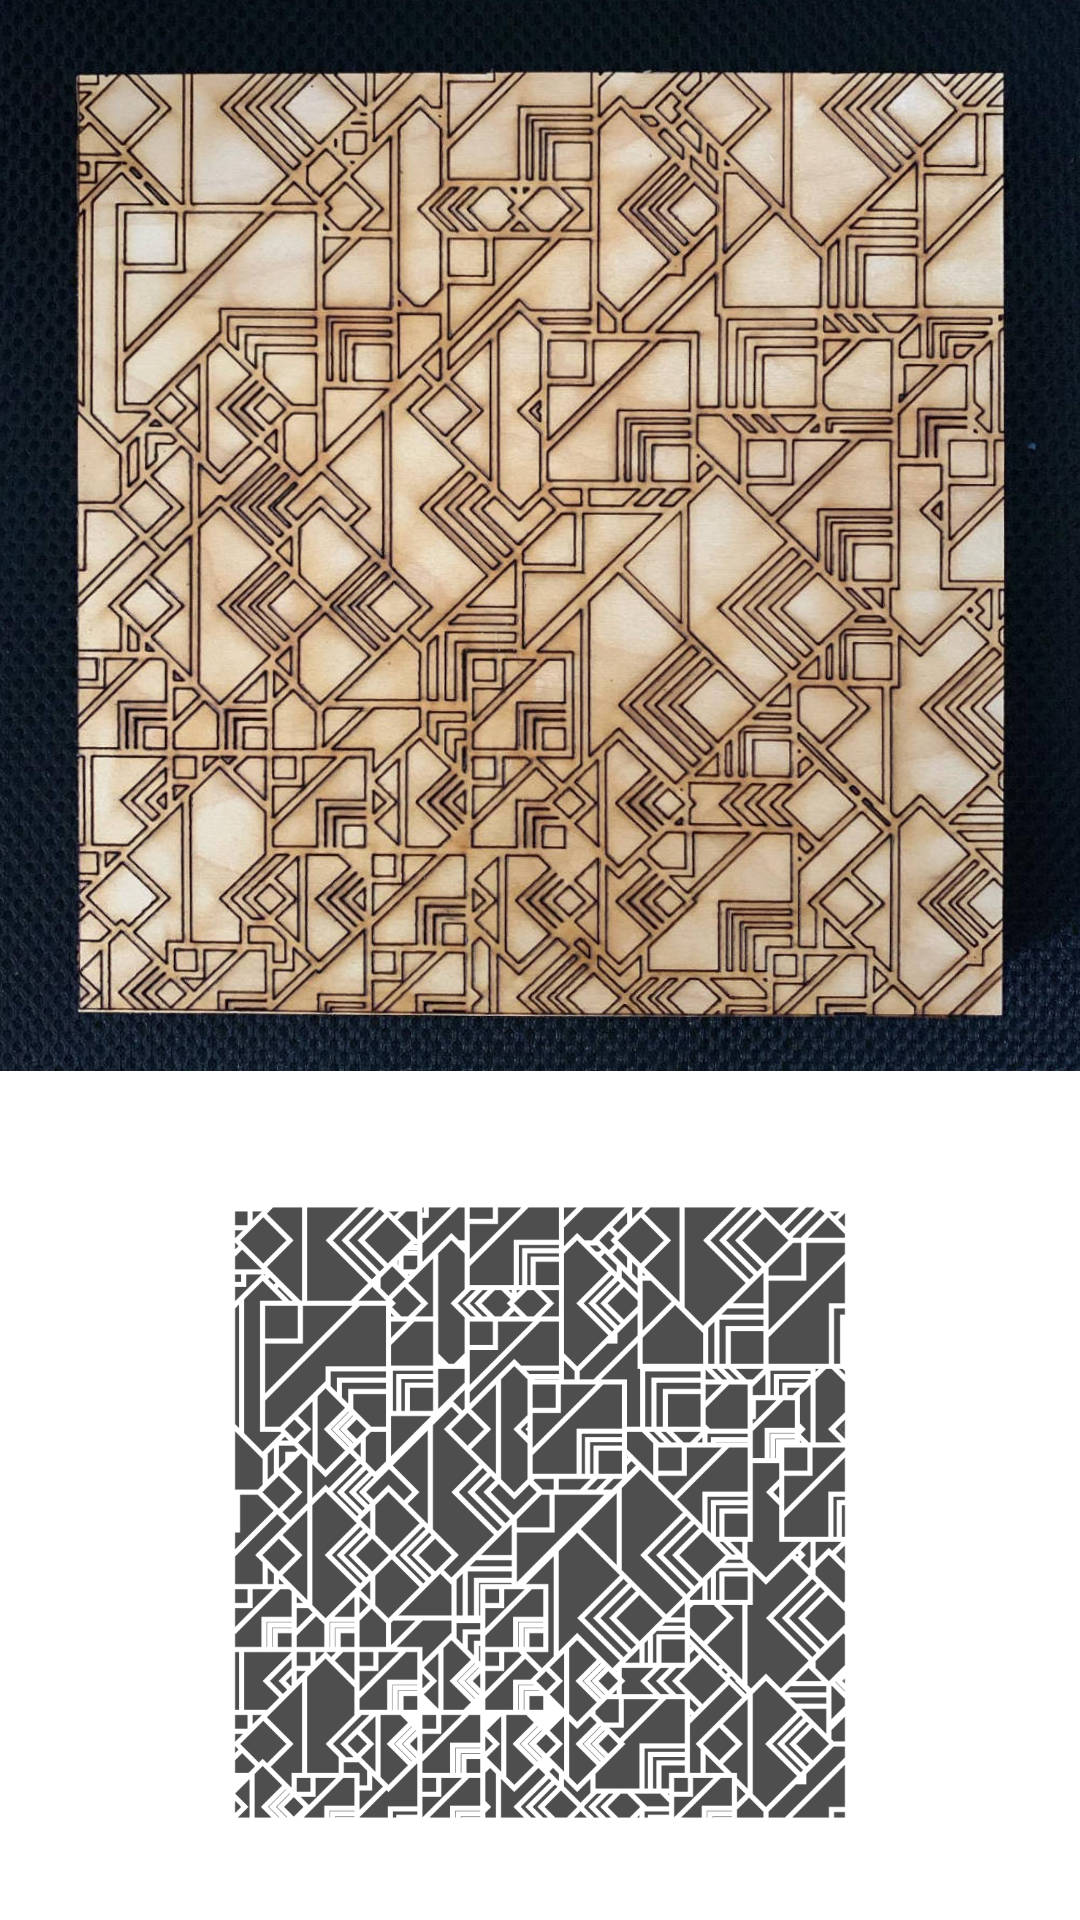 A photo of a generative wood engraving